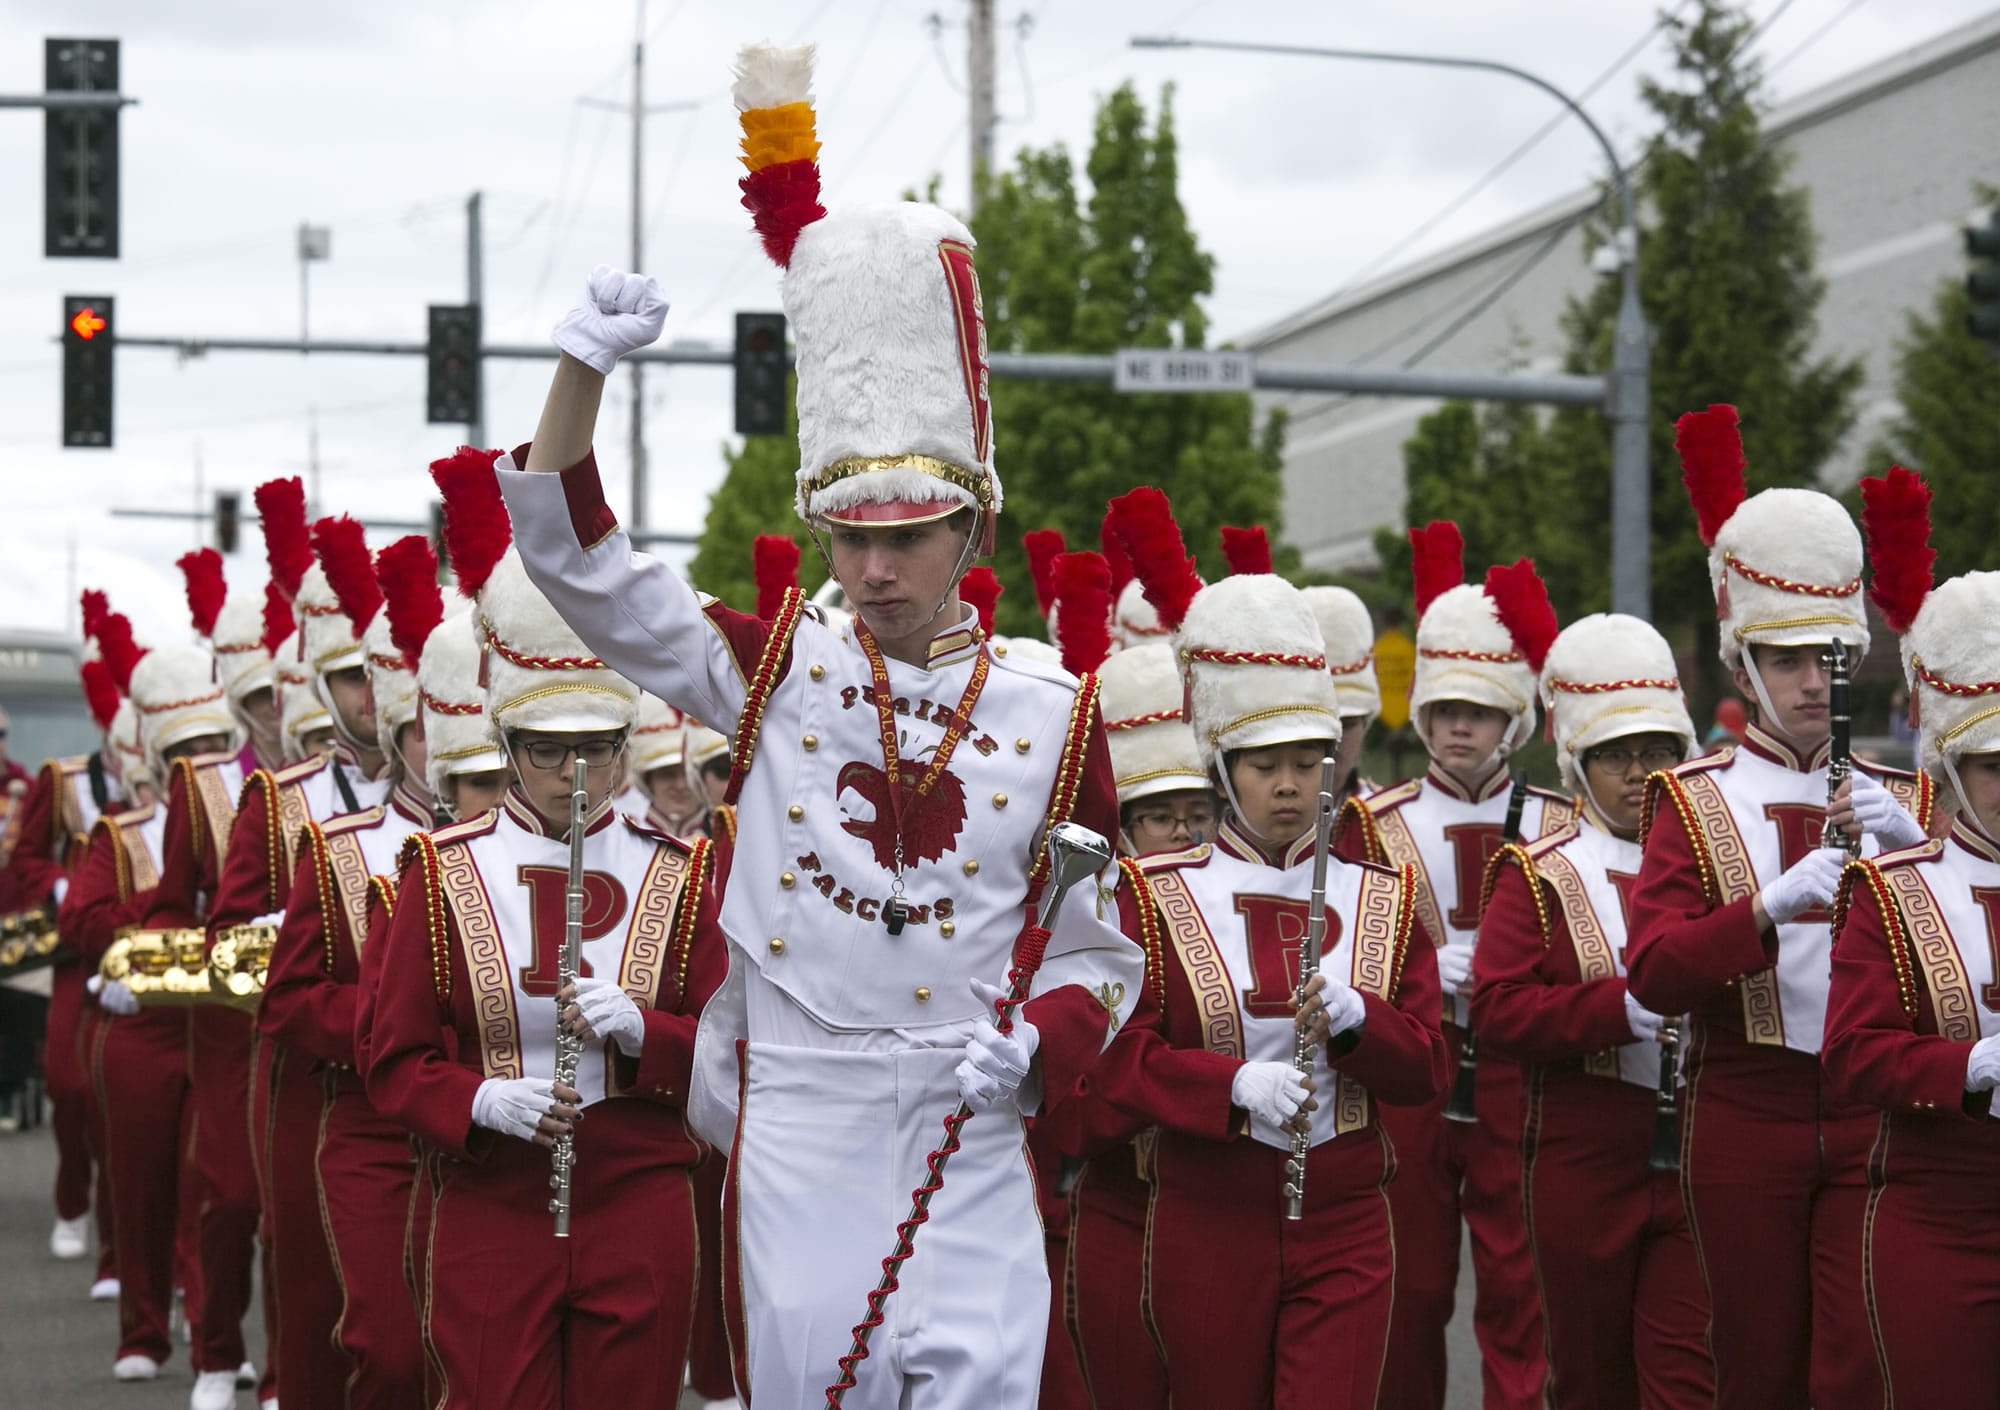 Crowds cheer at annual Hazel Dell Parade of Bands The Columbian